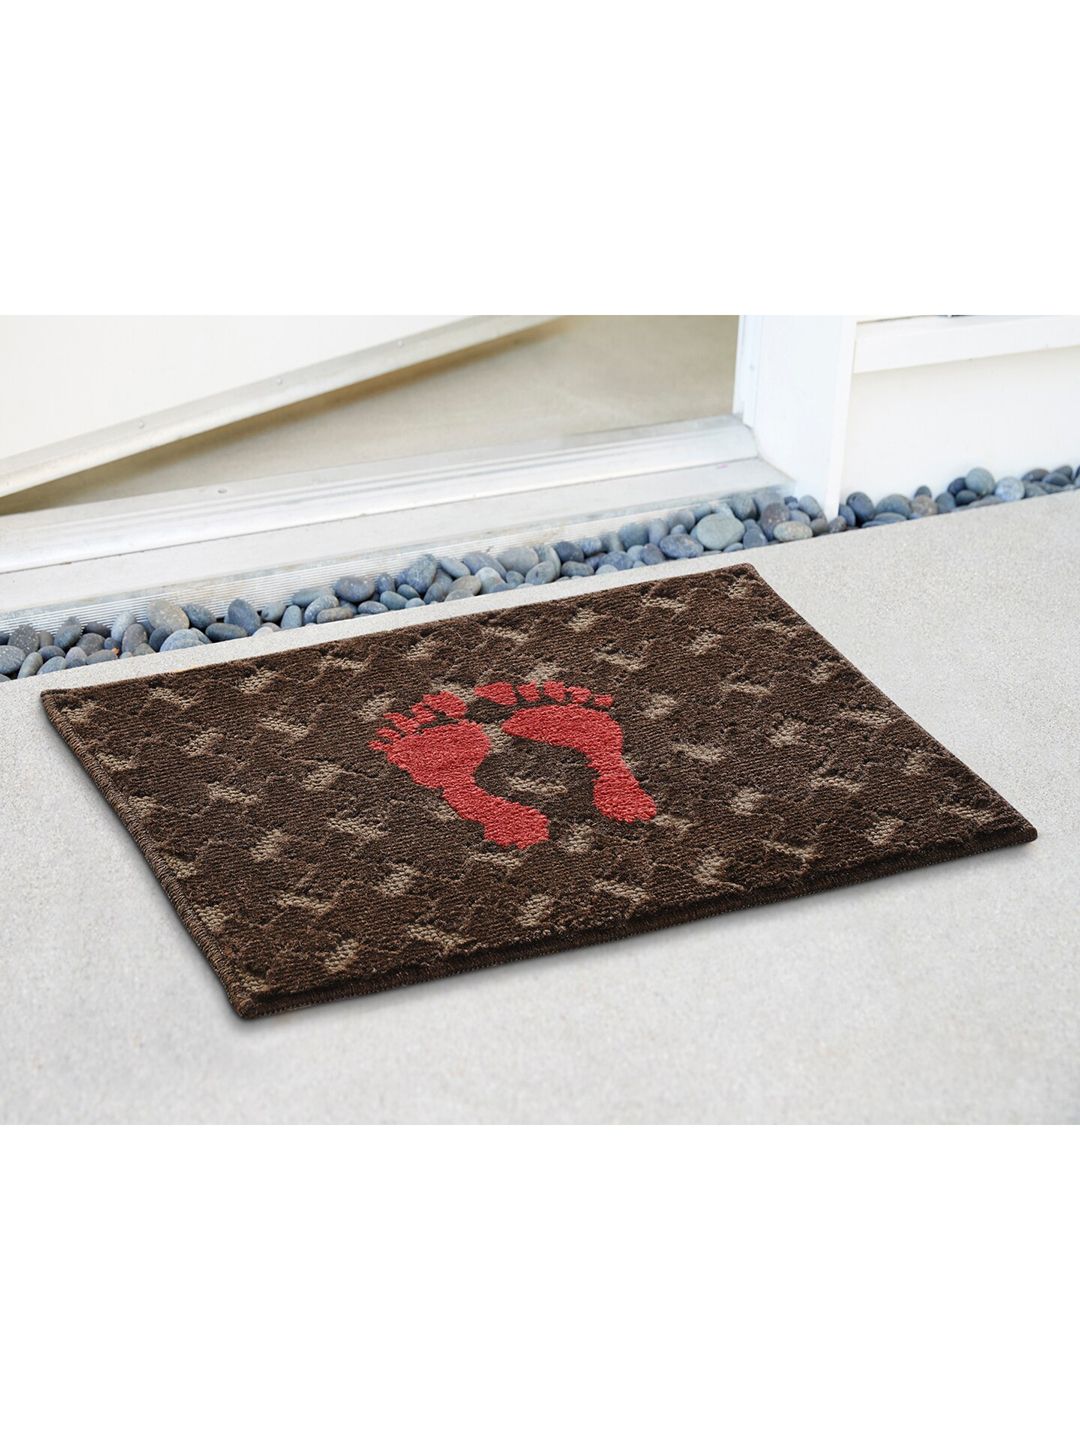 Saral Home Brown & Red Printed Anti-Skid Cotton Doormat Price in India